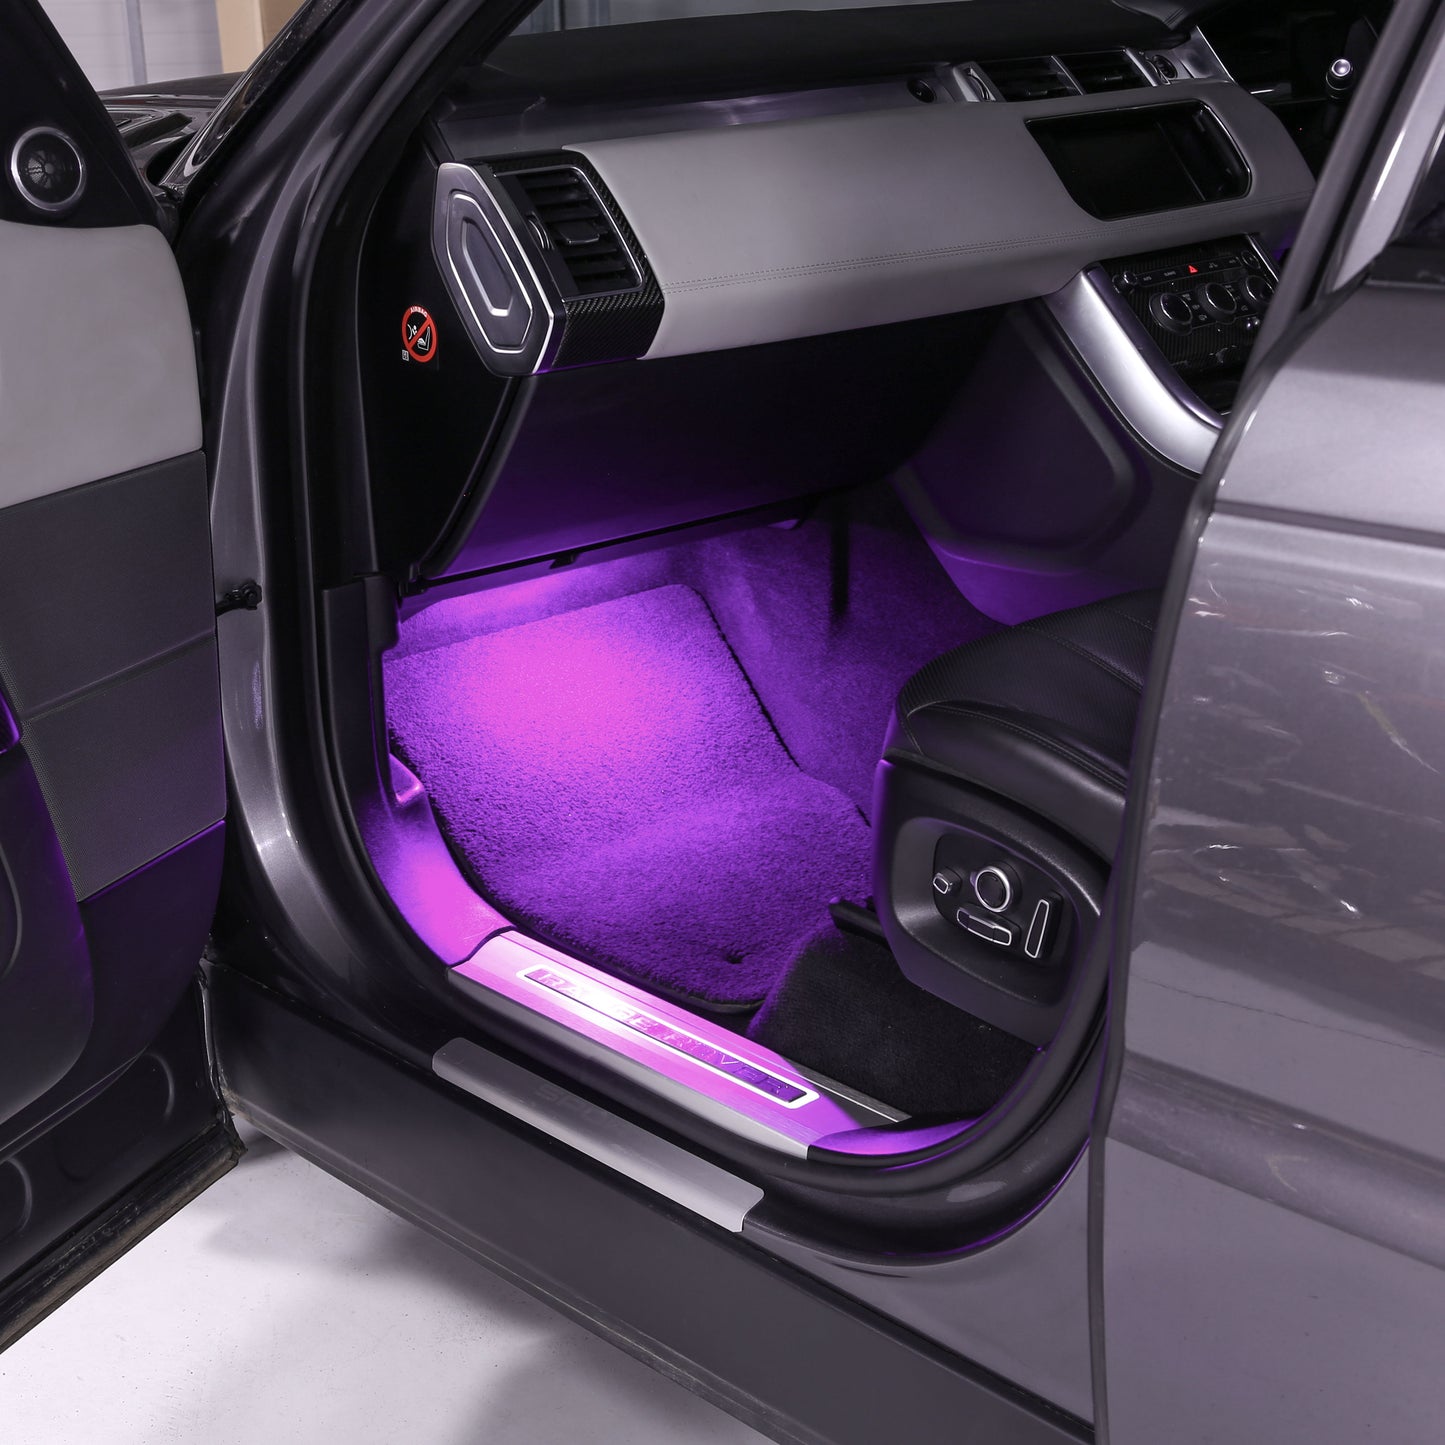 Violet/Purple LED interior Footwell Lamp for Land Rover Discovery Sport 2019+ (2pc)